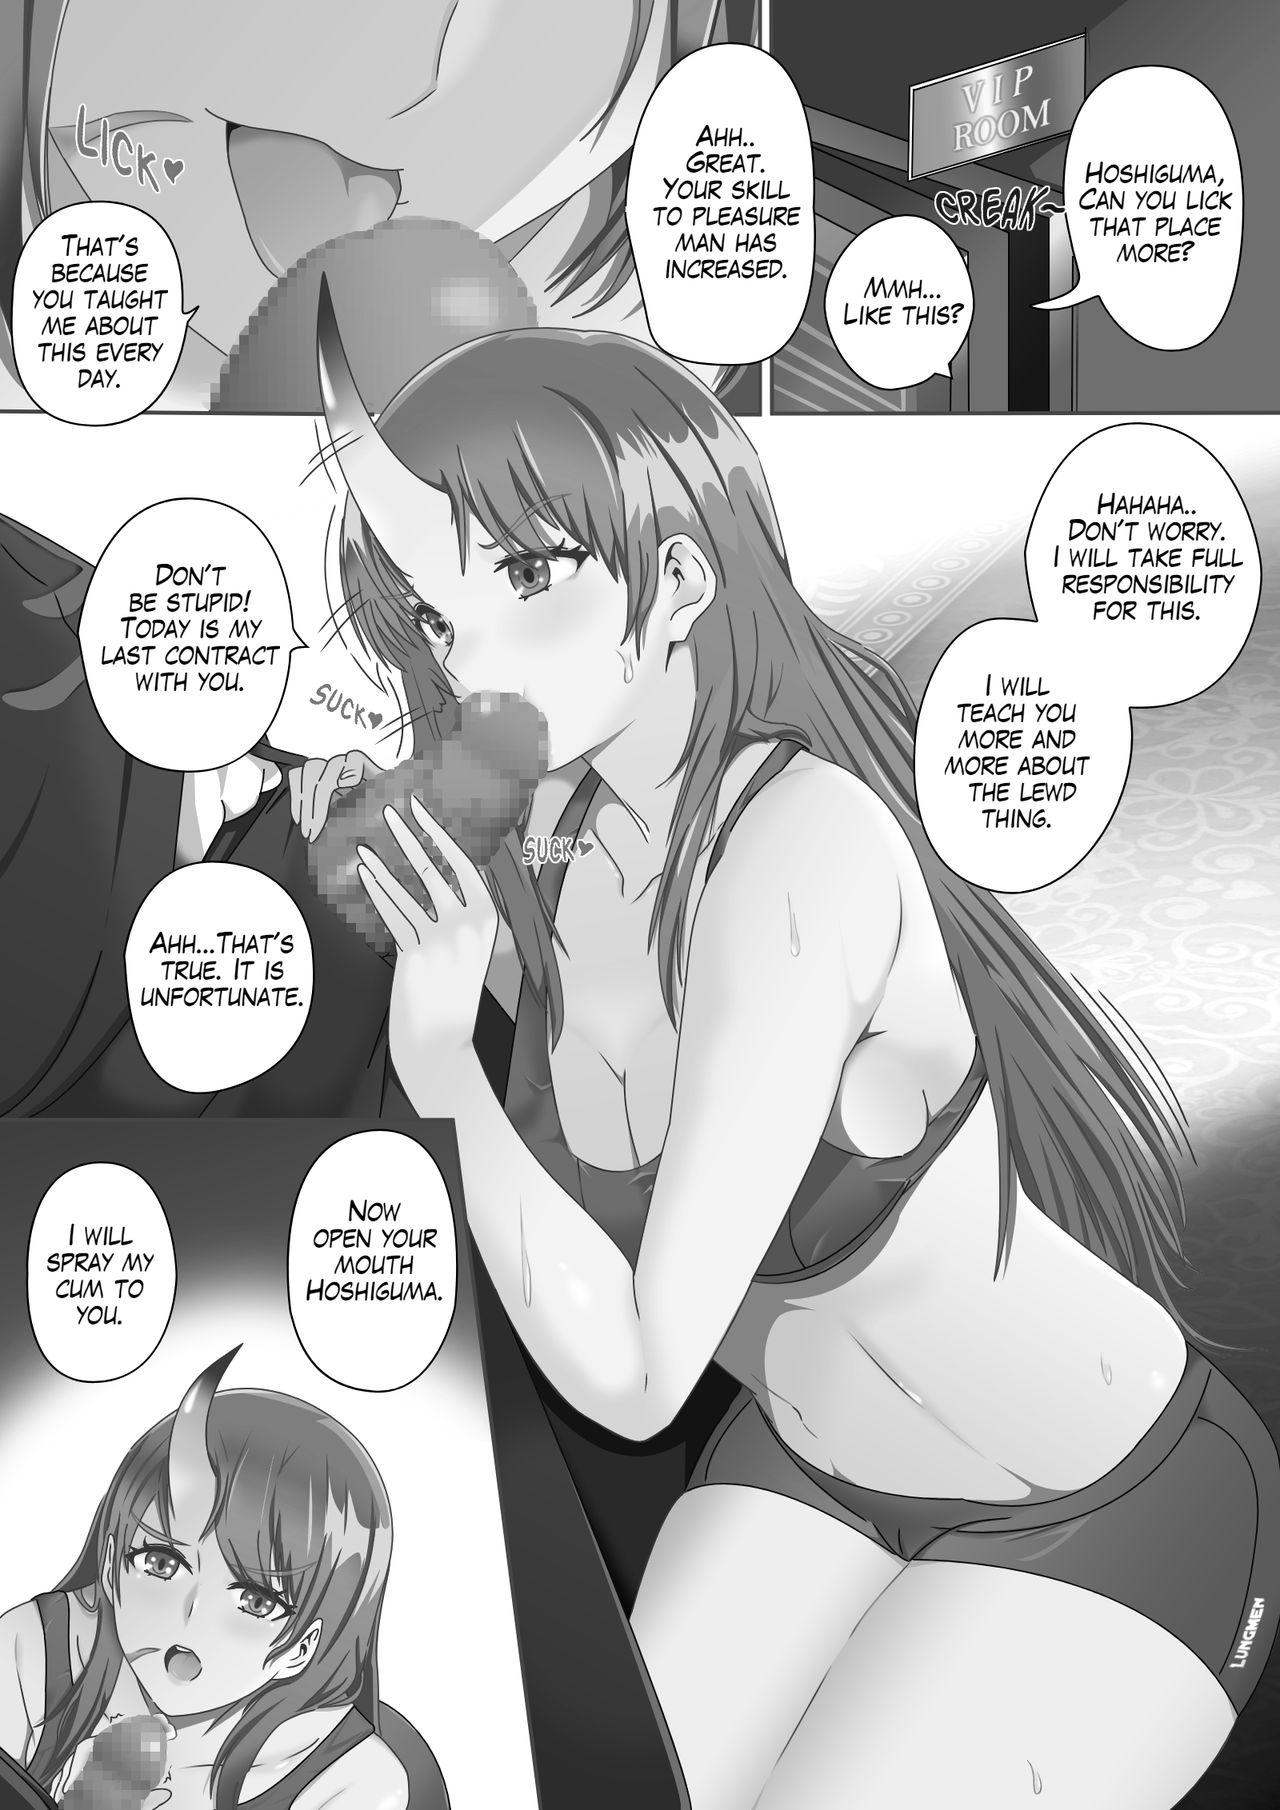 Chichona Hoshiguma's Secret Contract - Arknights Firsttime - Page 4